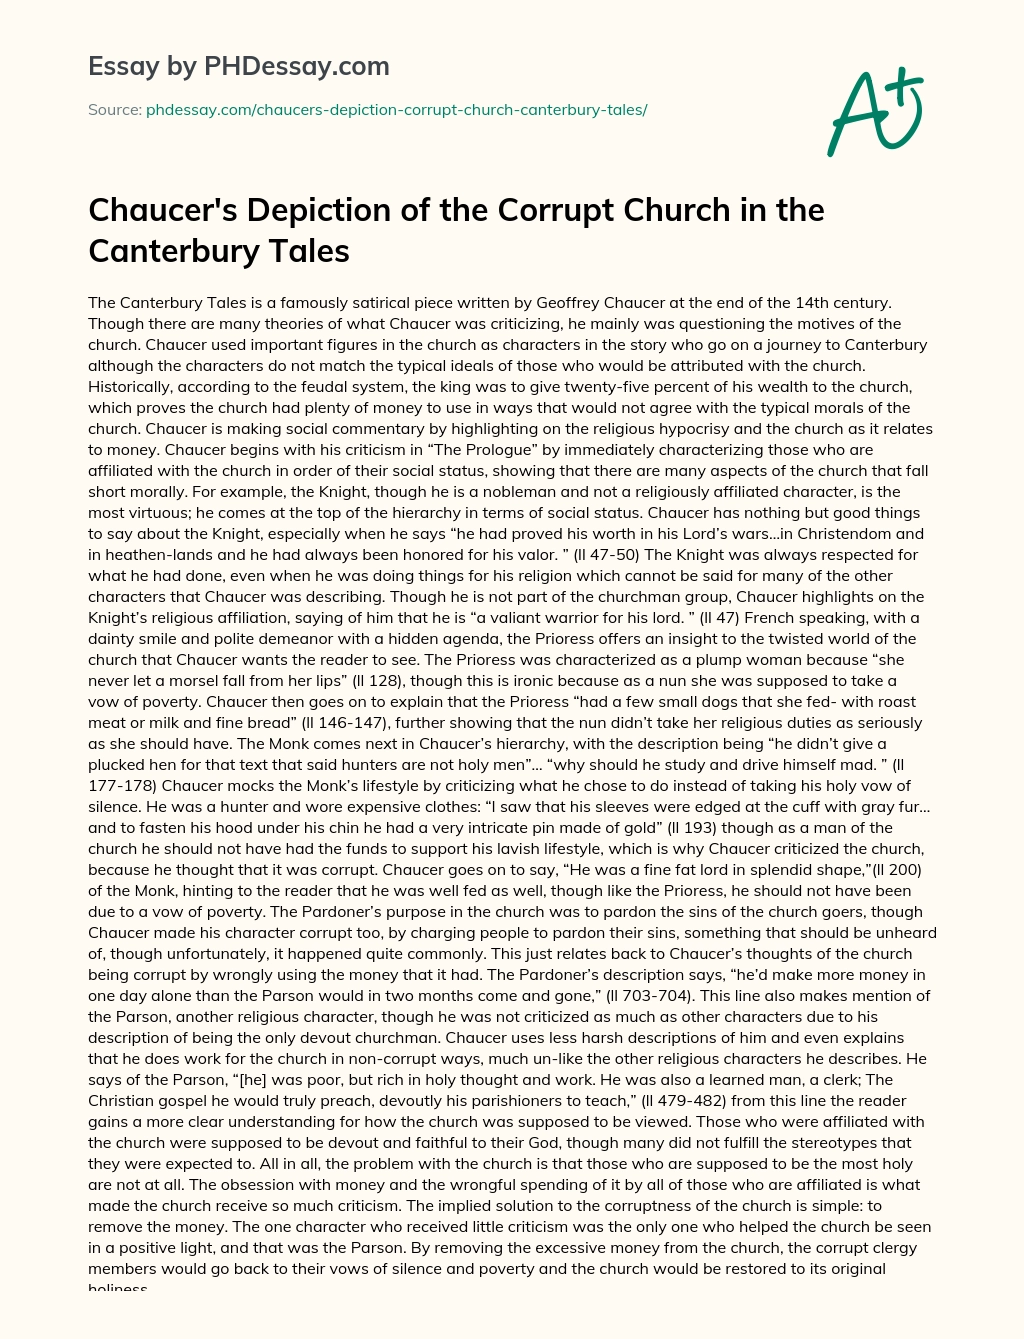 Chaucer’s Depiction of the Corrupt Church in the Canterbury Tales essay